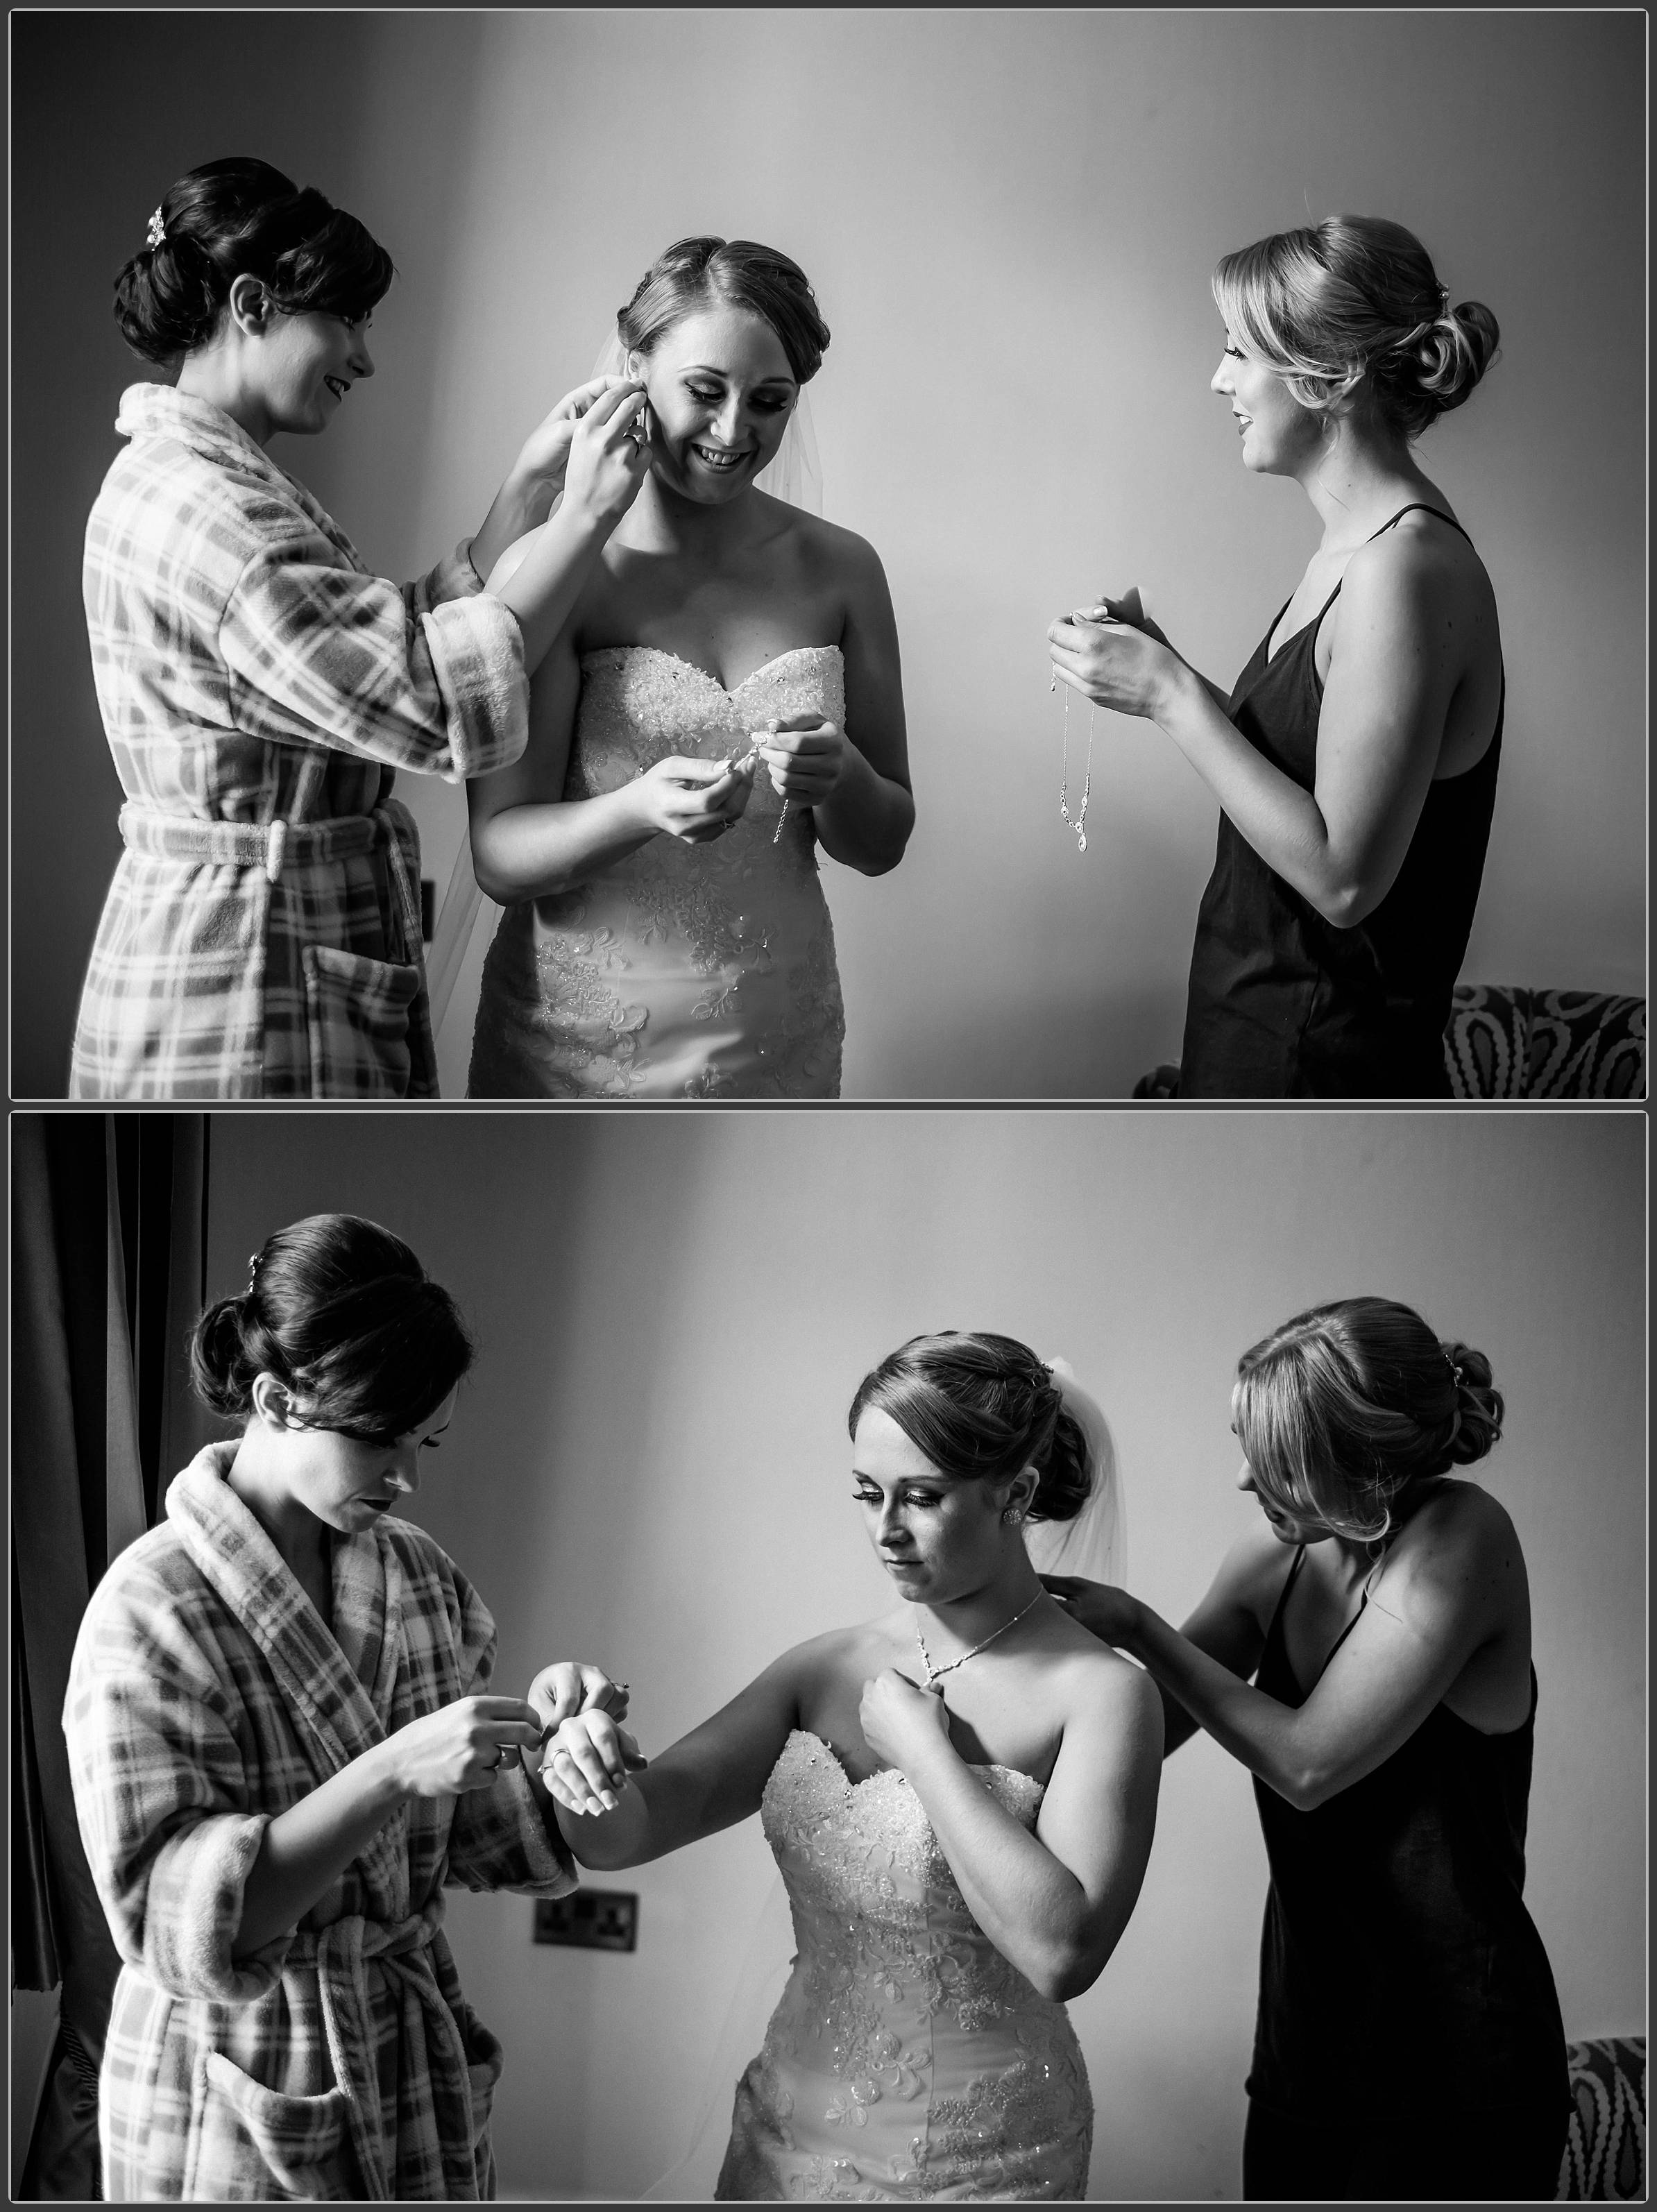 The bridesmaids helping the bride to get ready